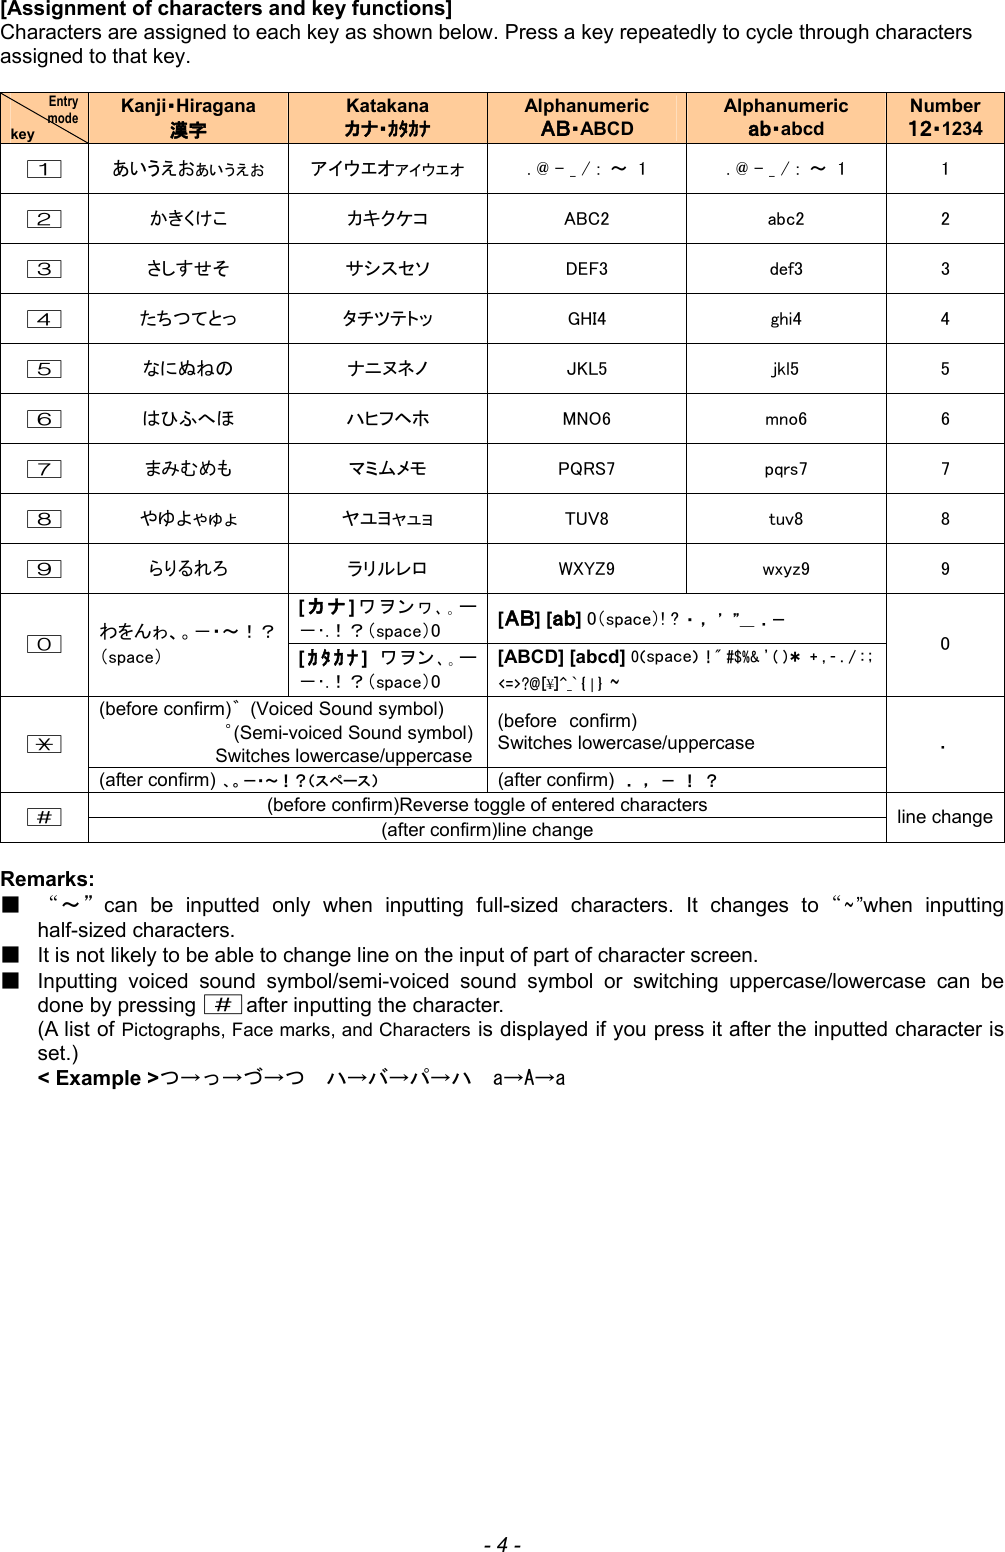 [Assignment of characters and key functions] Characters are assigned to each key as shown below. Press a key repeatedly to cycle through characters assigned to that key.  Entry mode key Kanji・Hiragana 漢字 Katakana カナ・ｶﾀｶﾅ Alphanumeric ＡＢ・ABCD Alphanumeric ａｂ・abcd Number １２・1234 1 あいうえおぁぃぅぇぉ  アイウエオァィゥェォ  . @ - _ / :  ～  1  . @ - _ / :  ～  1  1 2 かきくけこ  カキクケコ  ABC2  abc2  2 3 さしすせそ  サシスセソ  DEF3  def3  3 4 たちつてとっ  タチツテトッ  GHI4  ghi4  4 5 なにぬねの  ナニヌネノ  JKL5  jkl5  5 6 はひふへほ  ハヒフヘホ  MNO6  mno6  6 7 まみむめも  マミムメモ  PQRS7  pqrs7  7 8 やゆよゃゅょ  ヤユヨャュョ  TUV8  tuv8  8 9 らりるれろ  ラリルレロ  WXYZ9  wxyz9  9 [カナ]ワヲンヮ､｡ー－･.！？（space）0  [ＡＢ] [ａｂ] 0（space）! ? ・ ， ’ ”＿ ．－ 0 わをんゎ、。－・～！？（space）  [ｶﾀｶﾅ]  ワヲン､｡ー－･.！？（space）0 [ABCD] [abcd] 0（space）  ! &quot; #$%&amp; &apos; ( )＊ + , - . / : ; &lt;=&gt;?@[¥]^_` { | } ～ 0 (before confirm)゛  (Voiced Sound symbol)           ゜(Semi-voiced Sound symbol)         Switches lowercase/uppercase(before confirm) Switches lowercase/uppercase * (after confirm)  、。－・～！？（スペース） (after confirm) ．  ，  －  ！  ？ ． (before confirm)Reverse toggle of entered characters # (after confirm)line change    line change Remarks: ■ “～”can be inputted only when inputting full-sized characters. It changes to“～”when inputting half-sized characters.   ■ It is not likely to be able to change line on the input of part of character screen. ■ Inputting voiced sound symbol/semi-voiced sound symbol or switching uppercase/lowercase can be done by pressing #after inputting the character. (A list of Pictographs, Face marks, and Characters is displayed if you press it after the inputted character is set.) &lt; Example &gt;つ→っ→づ→つ  ハ→バ→パ→ハ  a→A→a                  - 4 - 